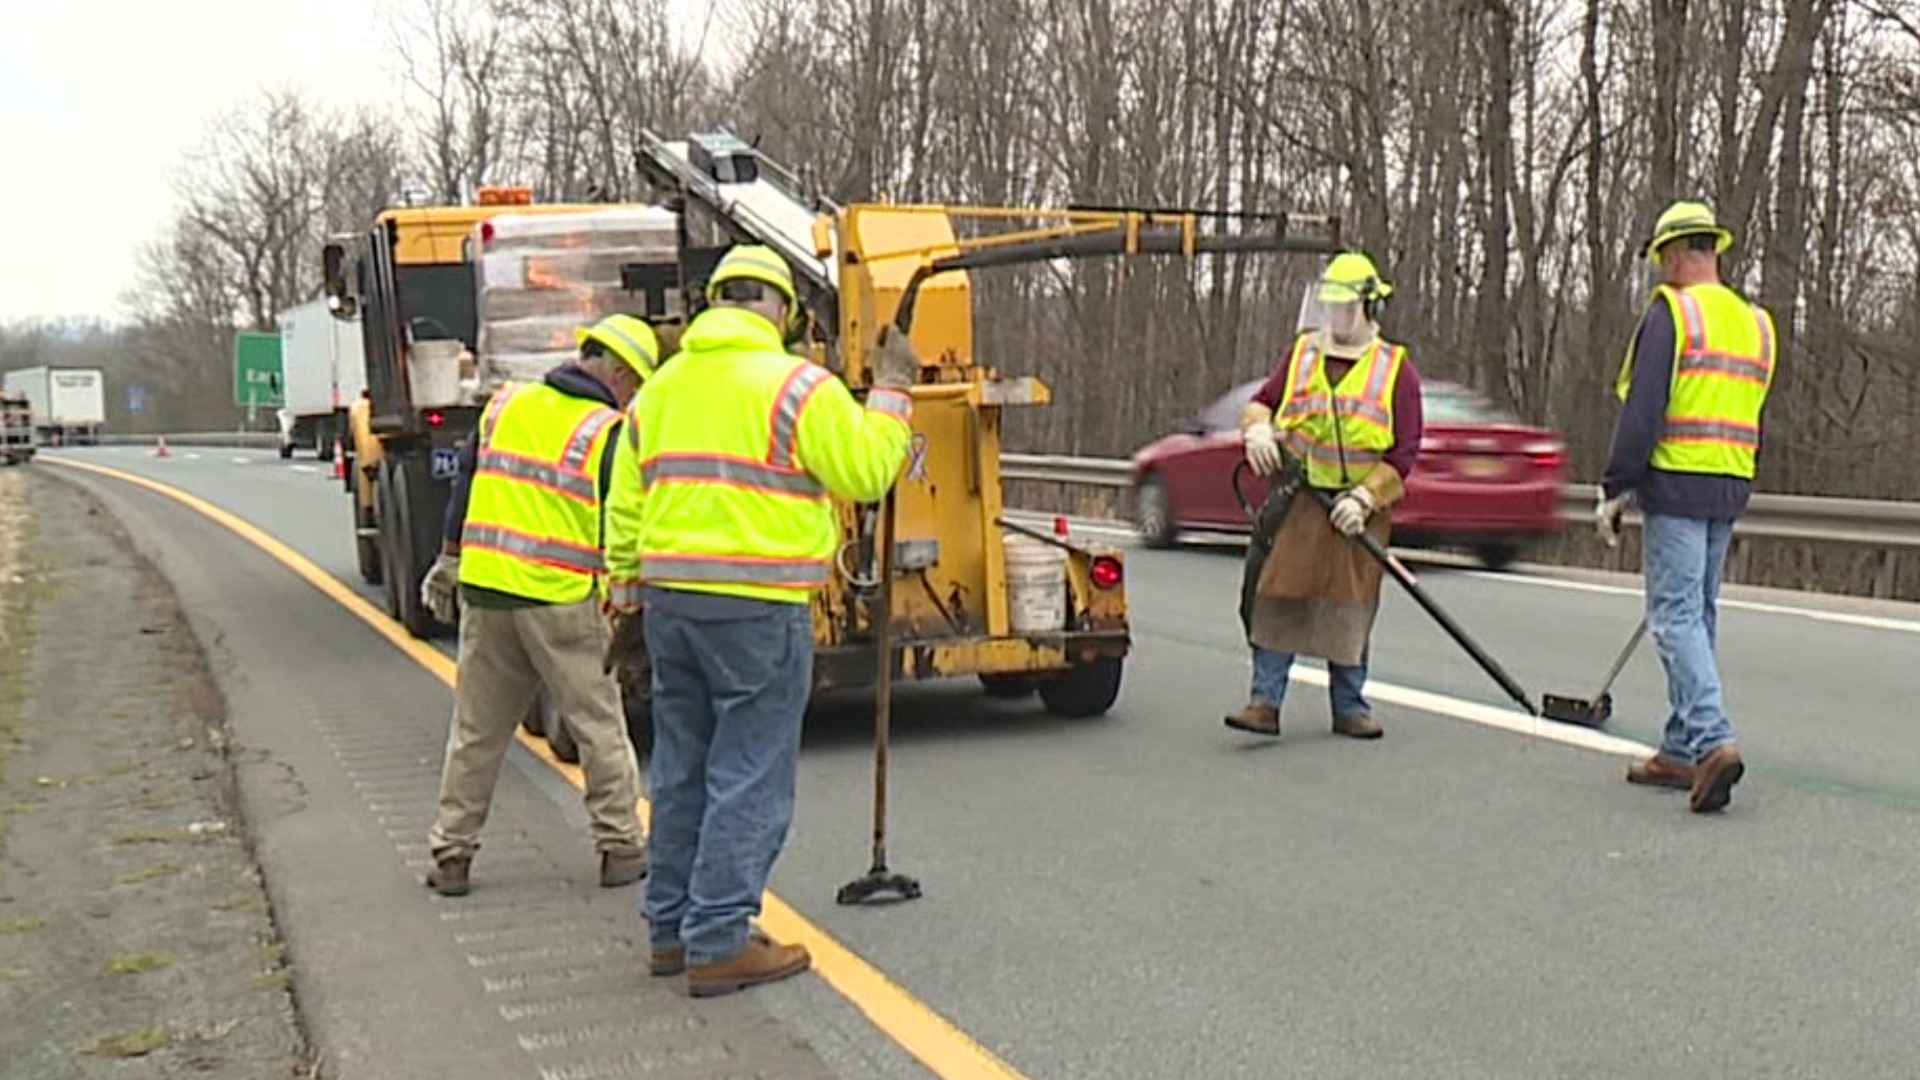 PennDOT road crews in Lackawanna County are taking full advantage of the mild and dry weather while they can, getting springtime projects done this winter.